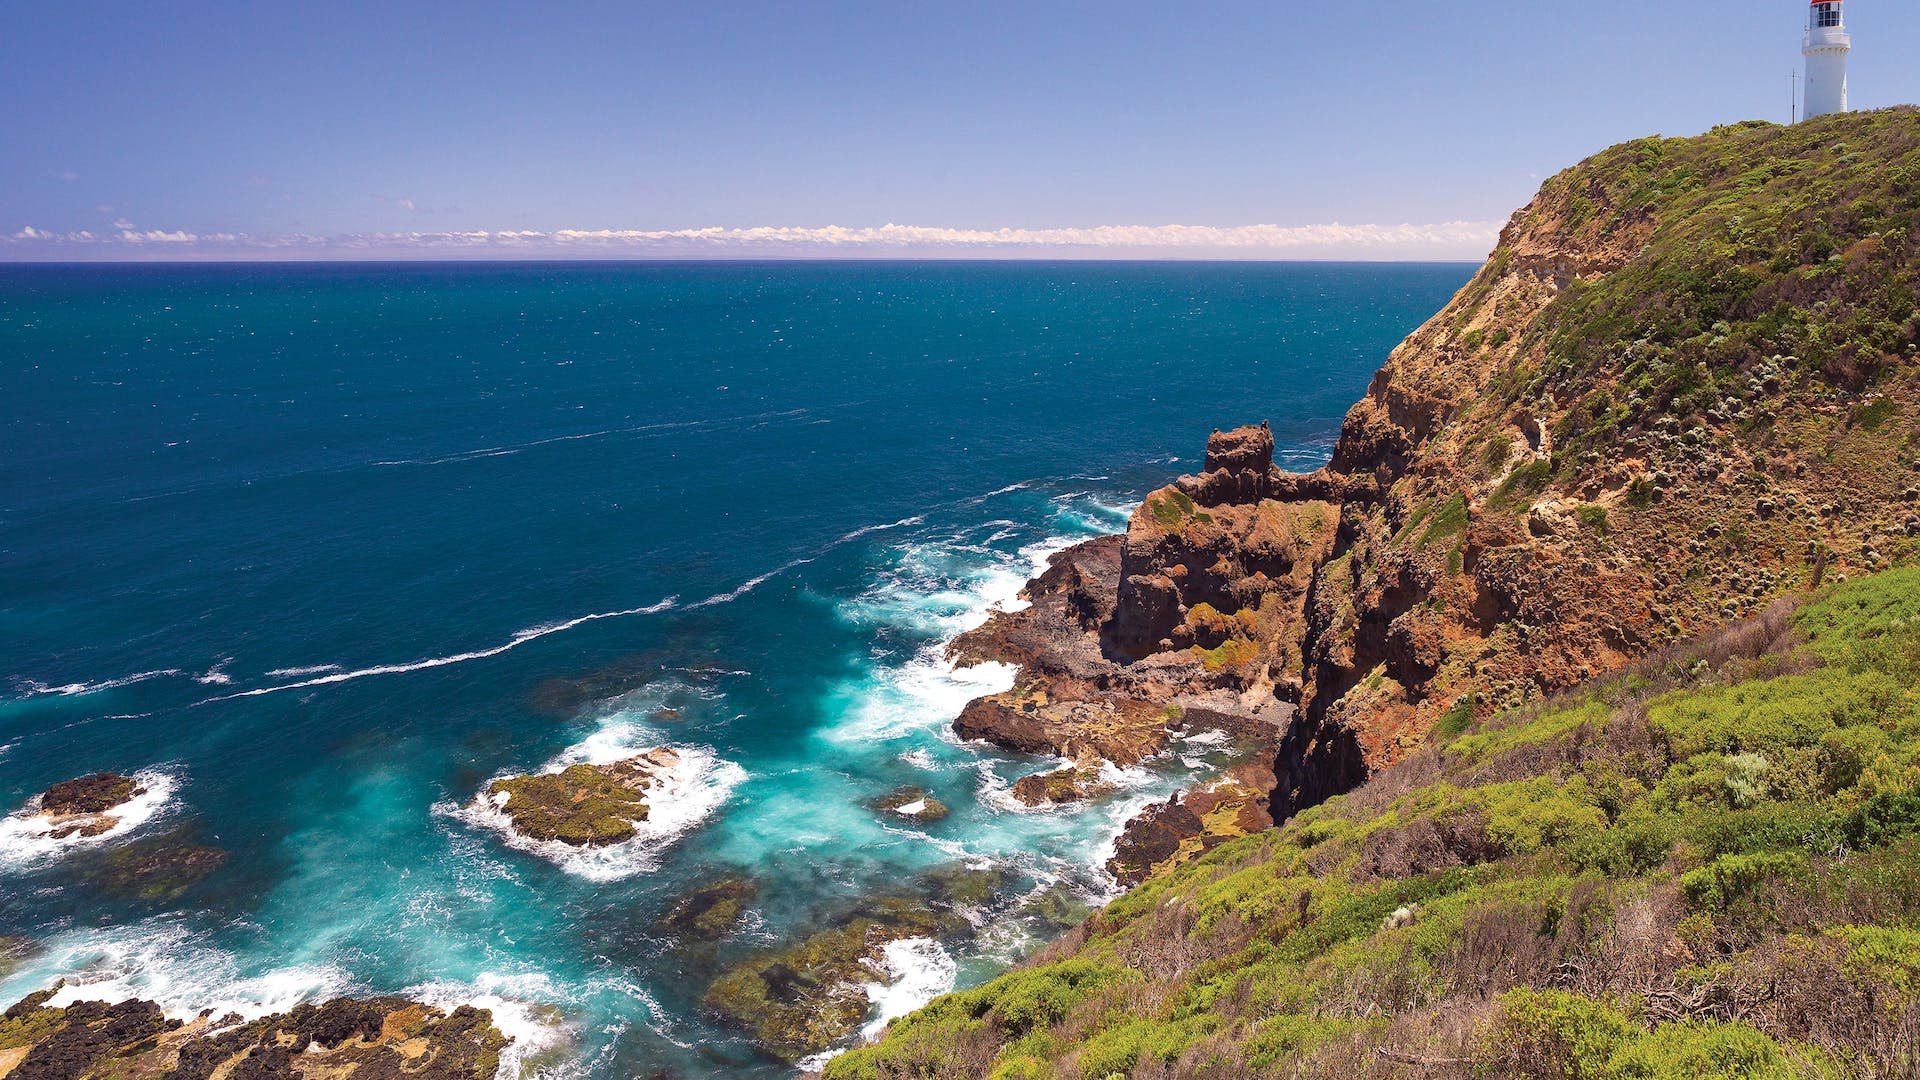 Young man dies after climbing cliff face near Melbourne